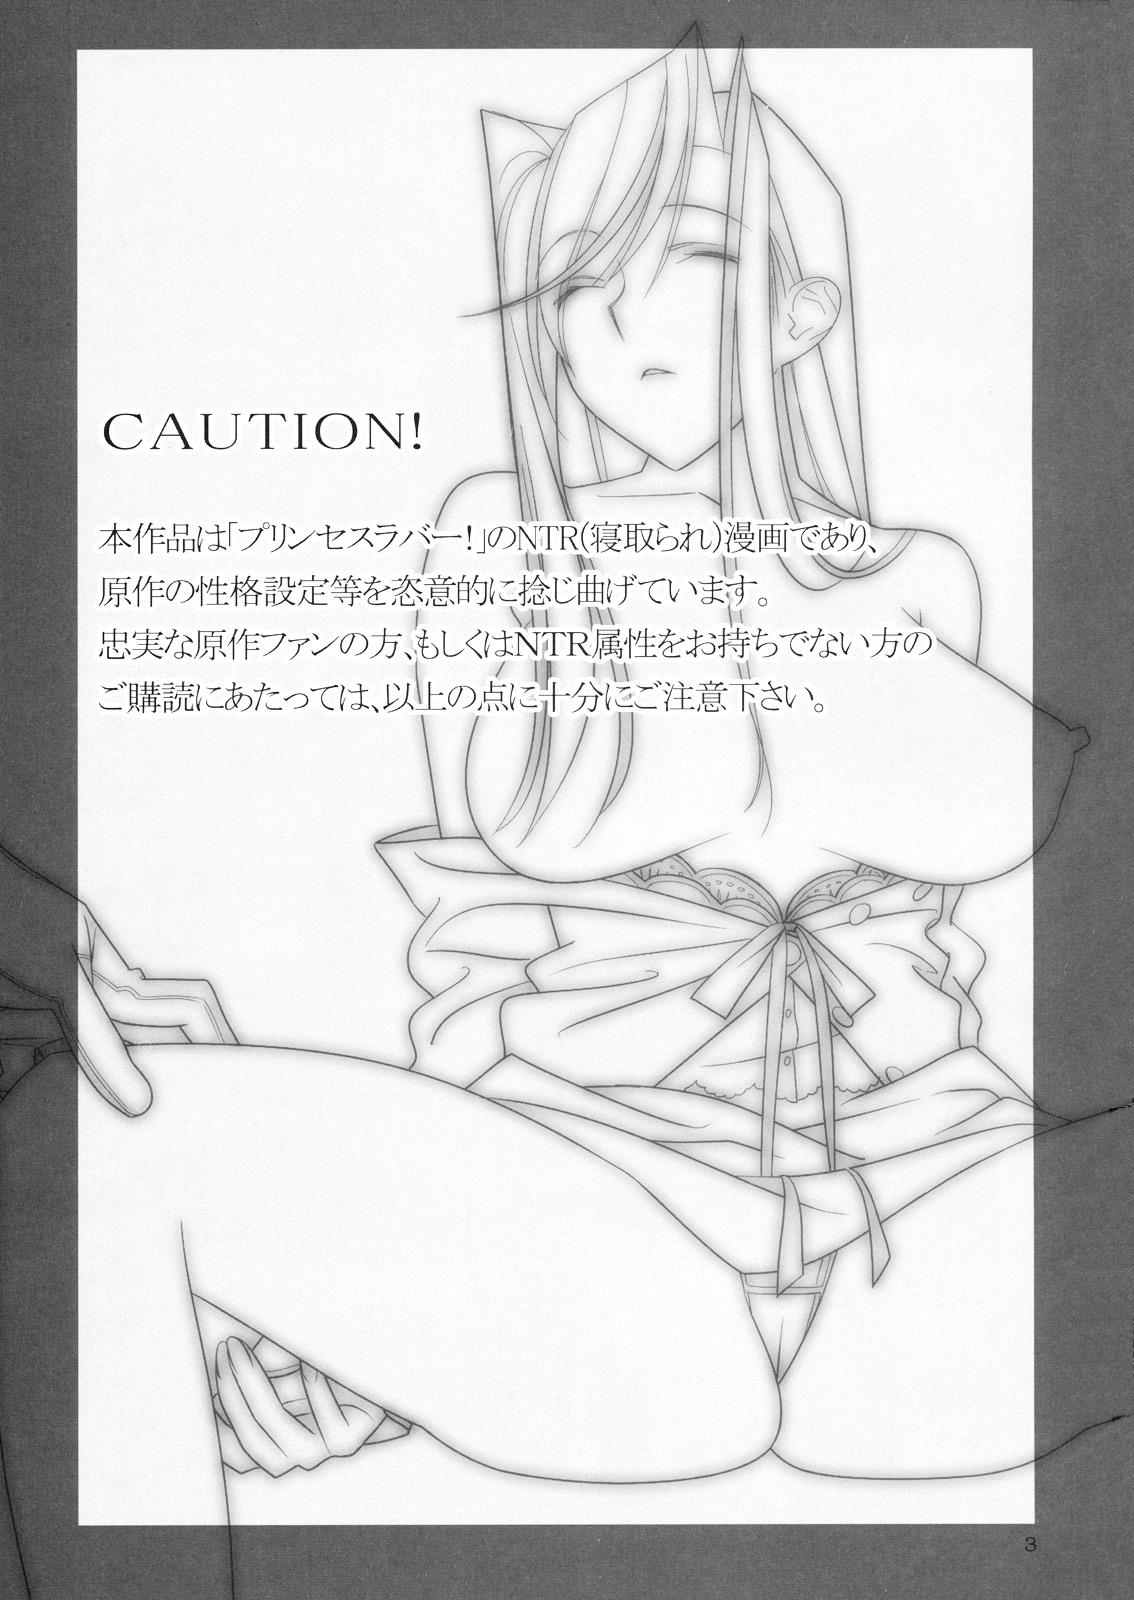 Amature Allure Admired Beautiful Flower Vol.2 - Princess lover Sexy Girl Sex - Page 2